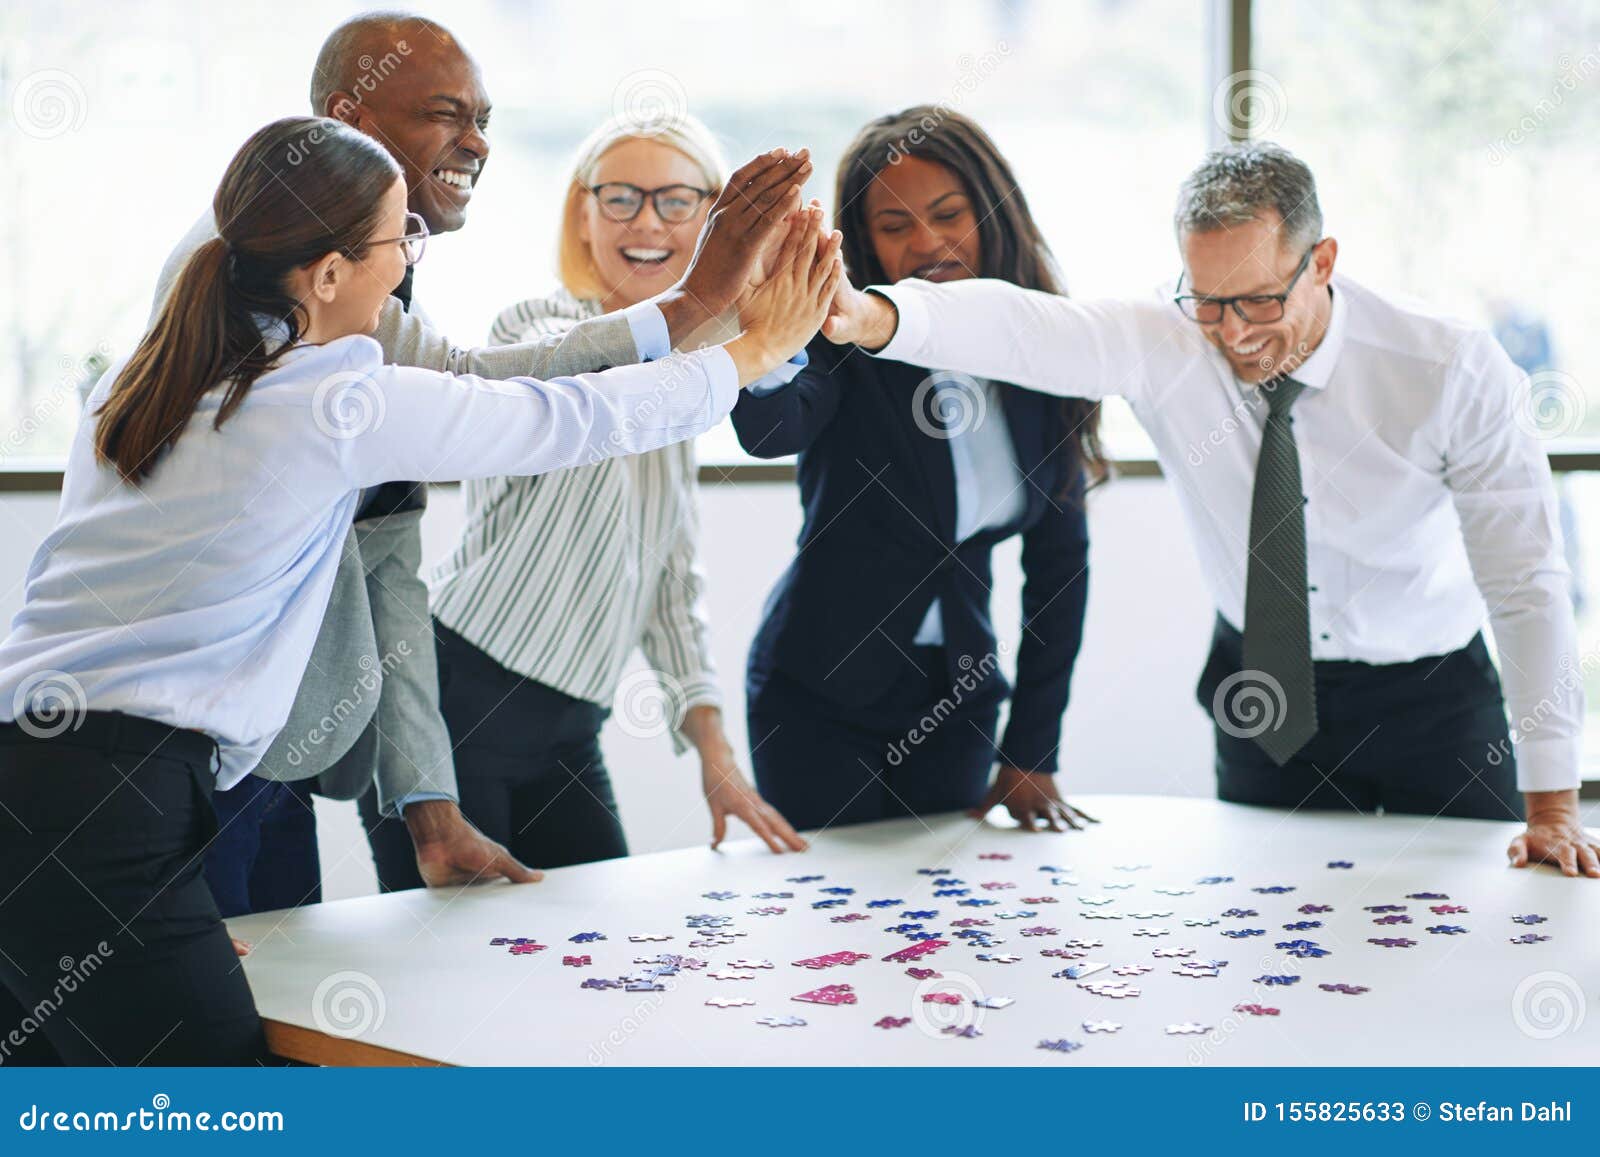 laughing businesspeople high fiving together while solving a jig